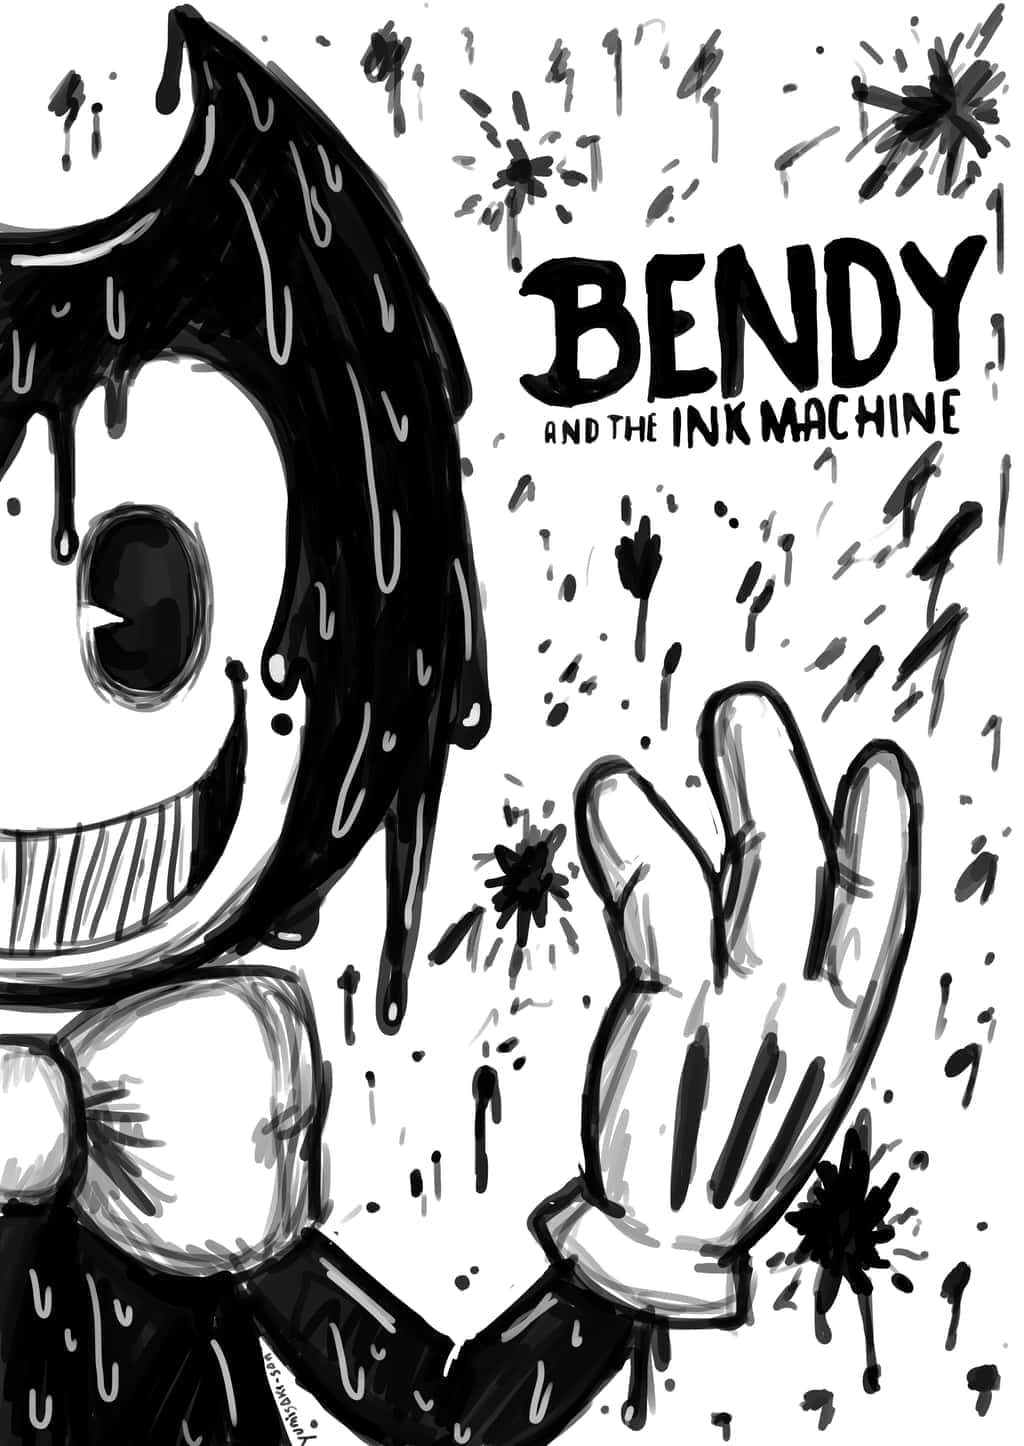 Experience the Thrill of Bendy and the Ink Machine